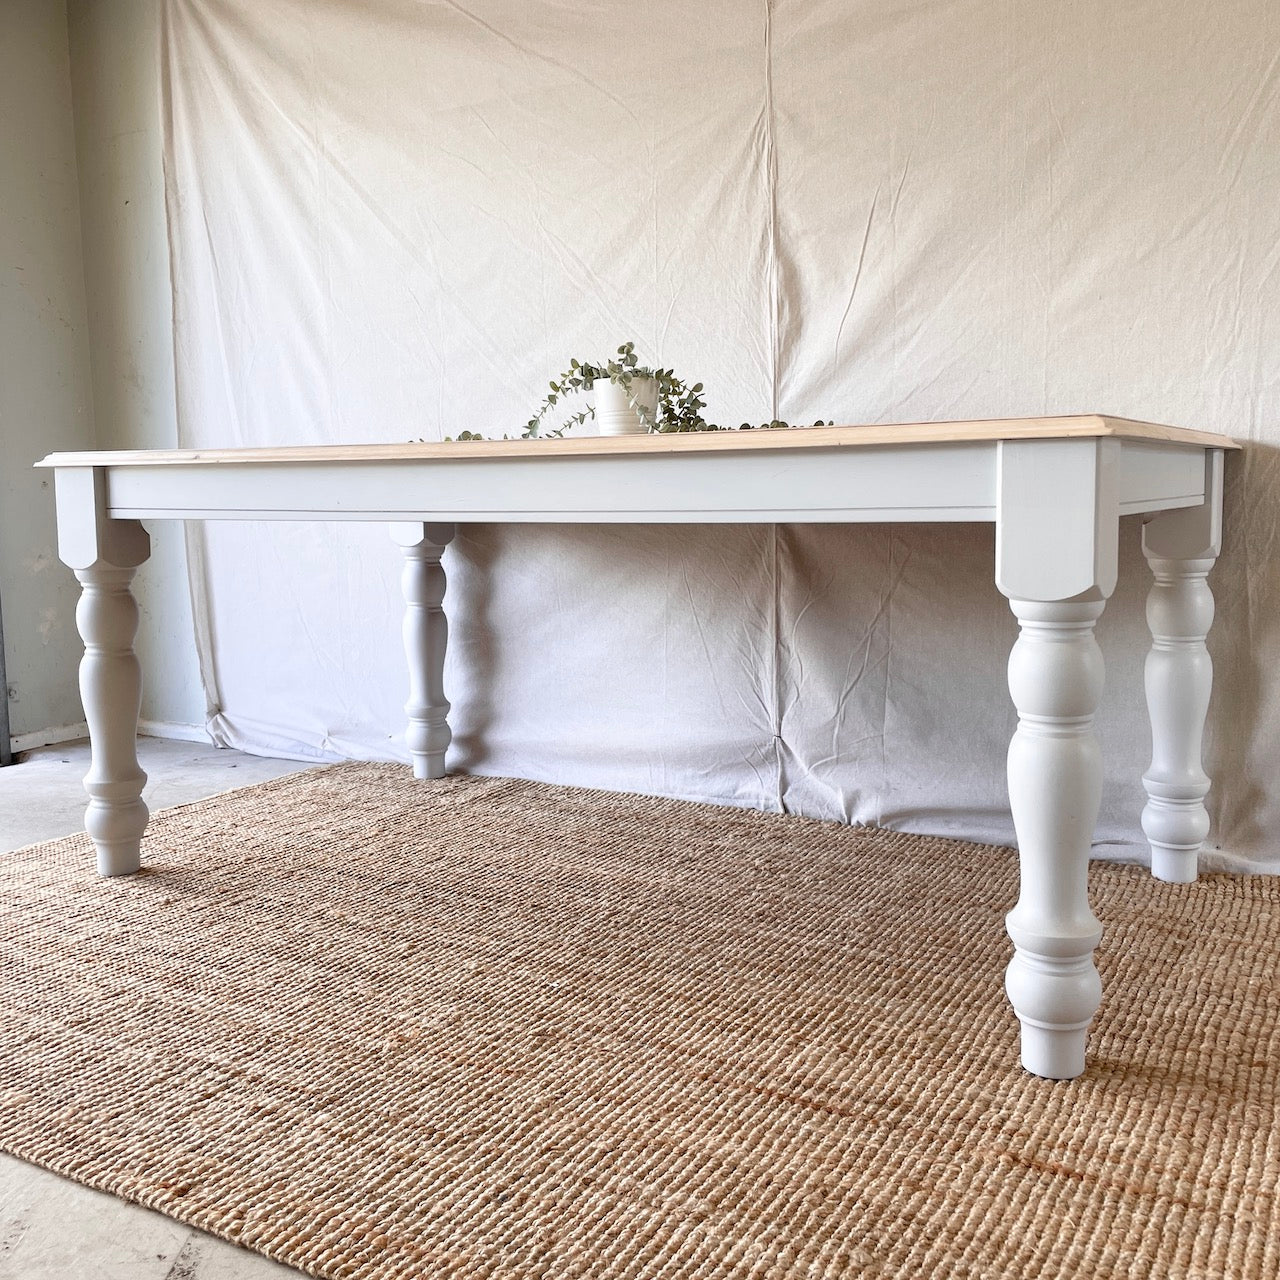 Hamptons Country Dining Room Table